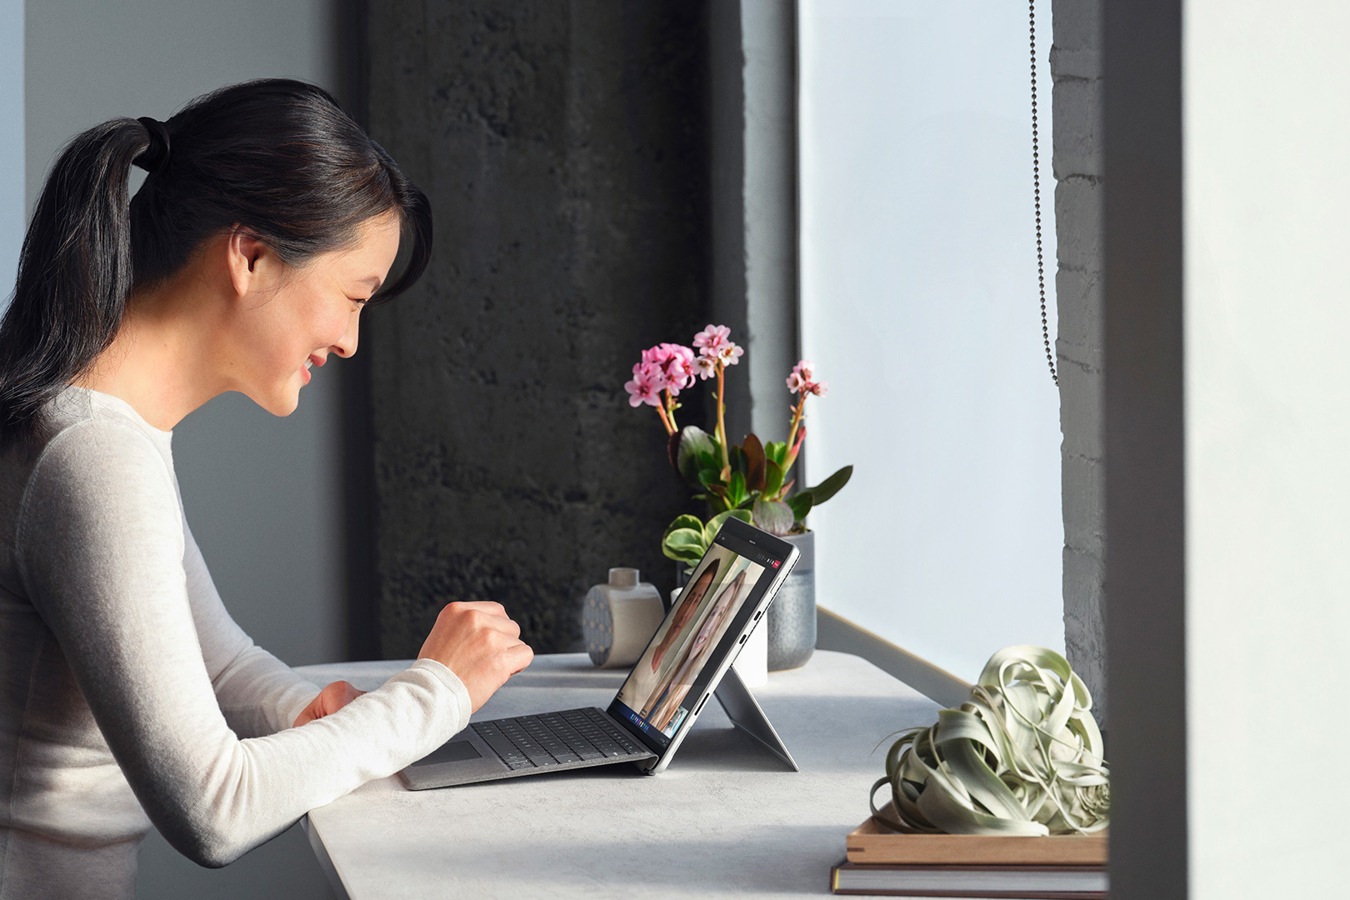 A person is observed taking a Microsoft Teams call from a Surface Pro 8 device in a remote work setting